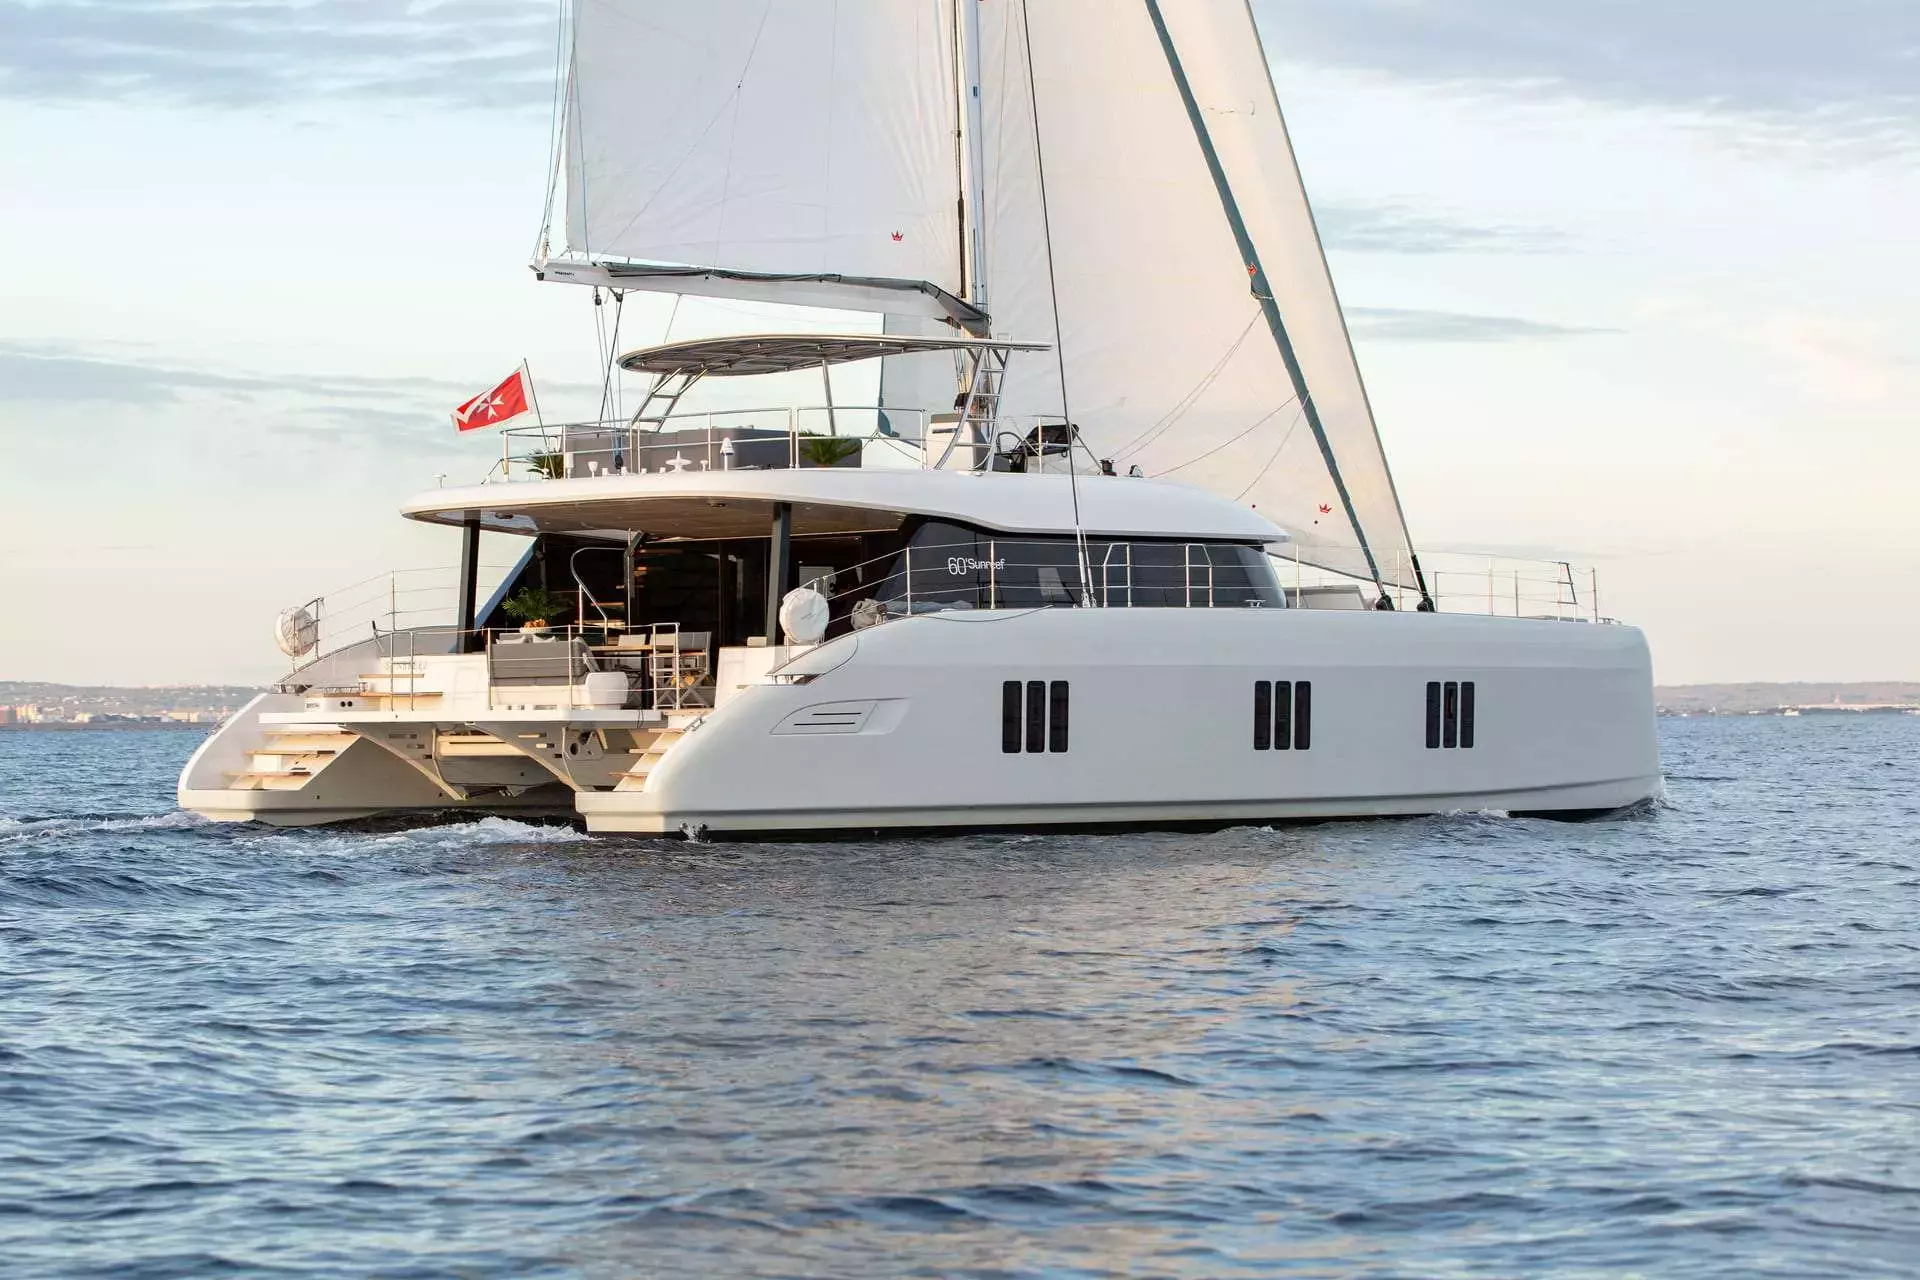 Sunbreeze by Sunreef Yachts - Top rates for a Rental of a private Sailing Catamaran in Spain